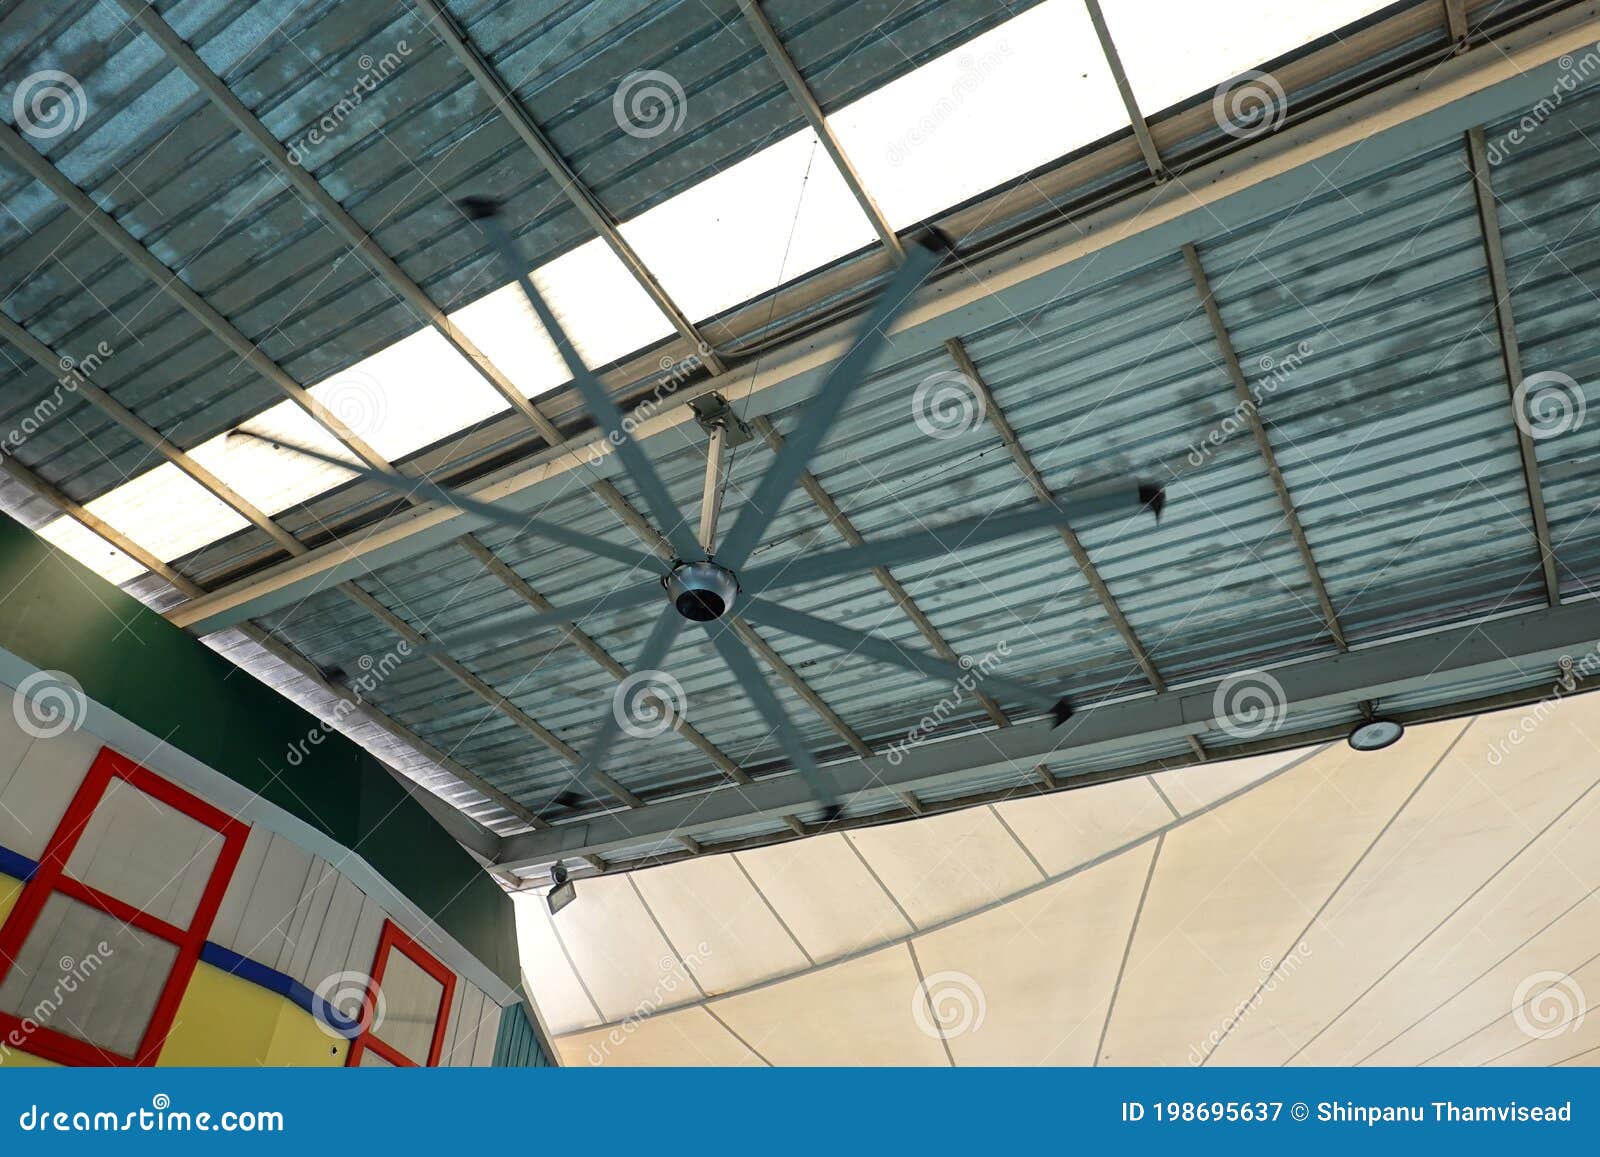 metal ceiling and large fans for open air shopping mall buildin